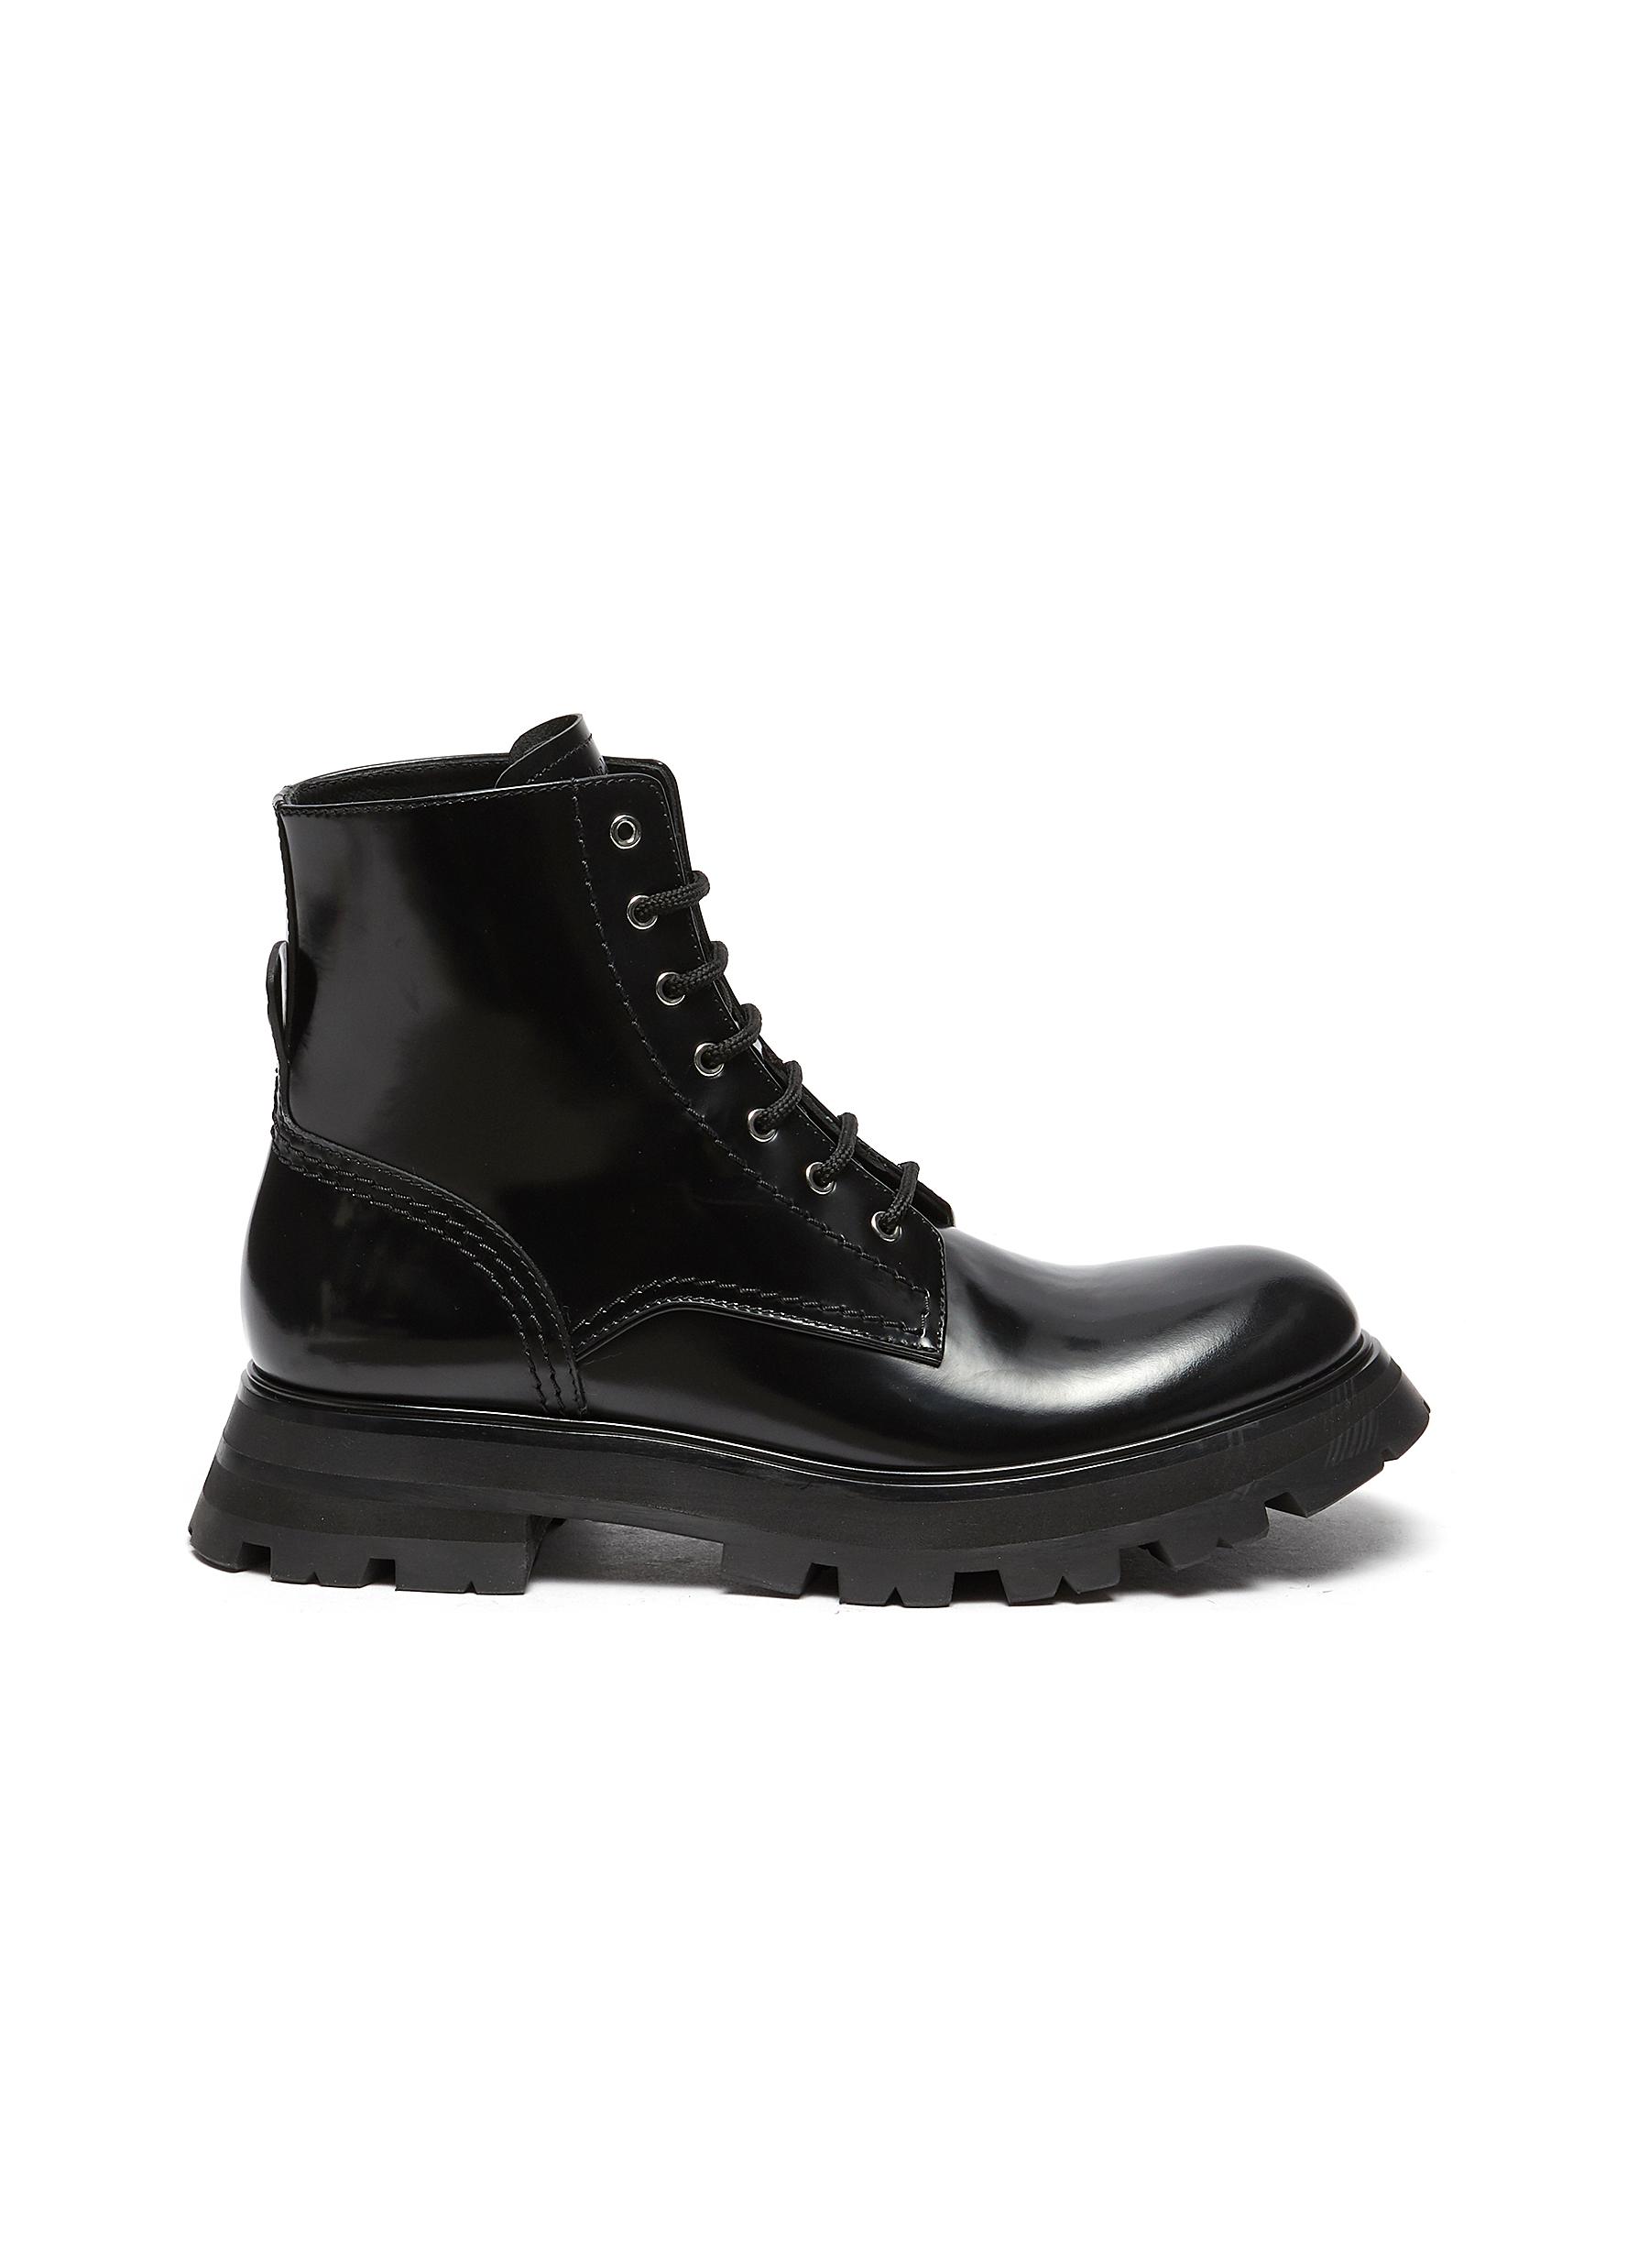 ALEXANDER MCQUEEN 'WONDER' CURVED TOE TREAD SOLE LEATHER LACE-UP BOOTS